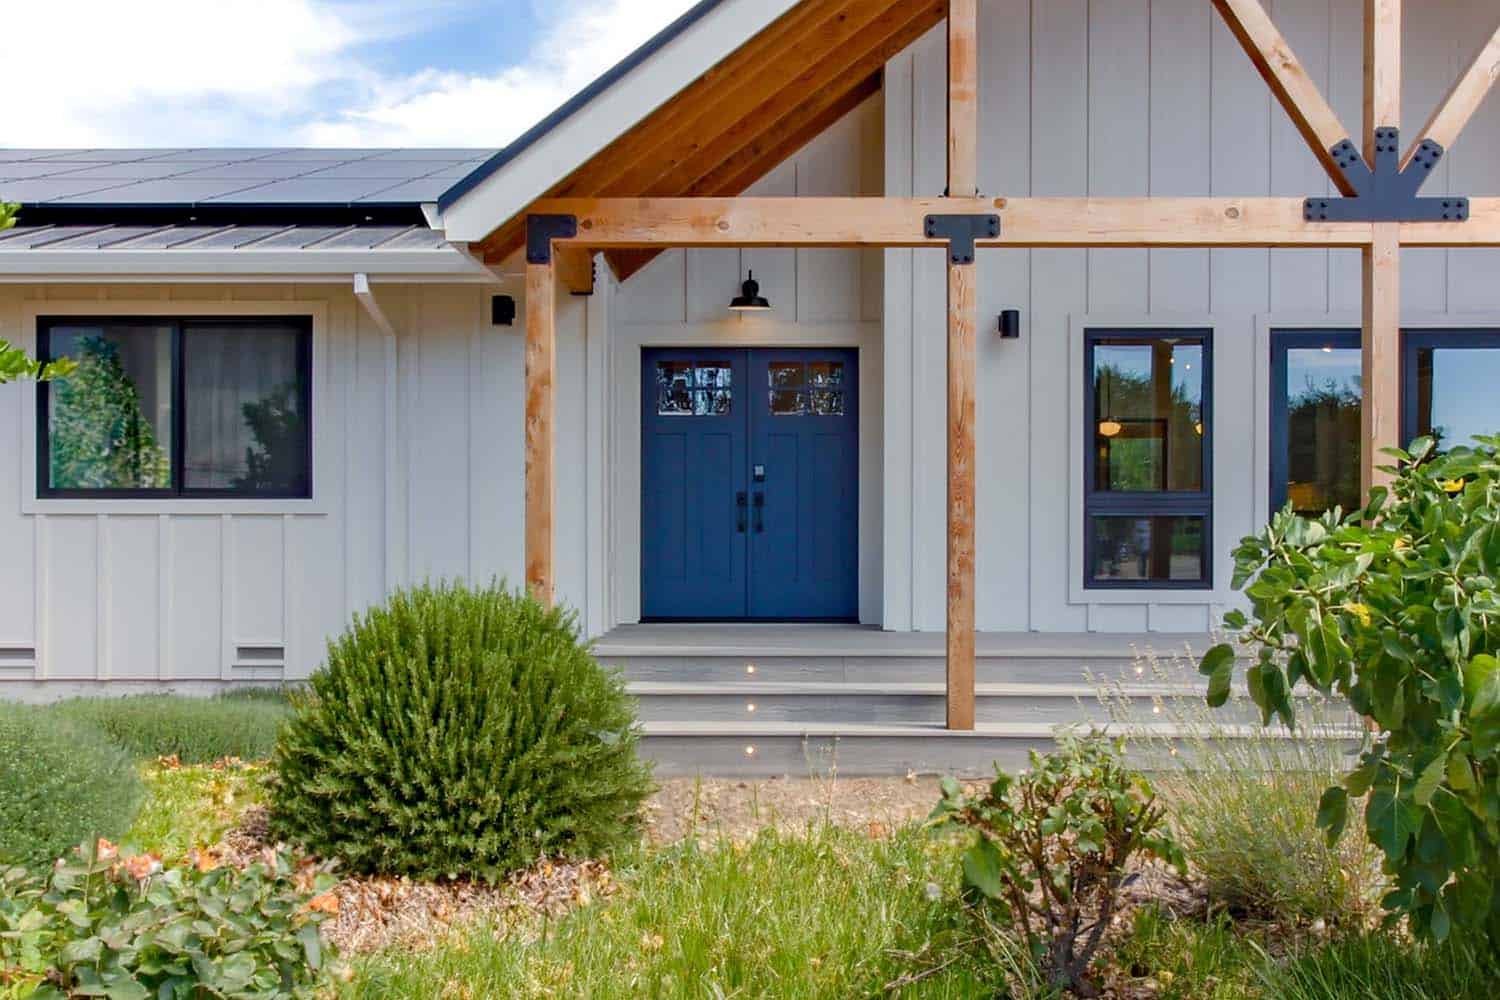 traditional farmhouse style home exterior with a blue front door